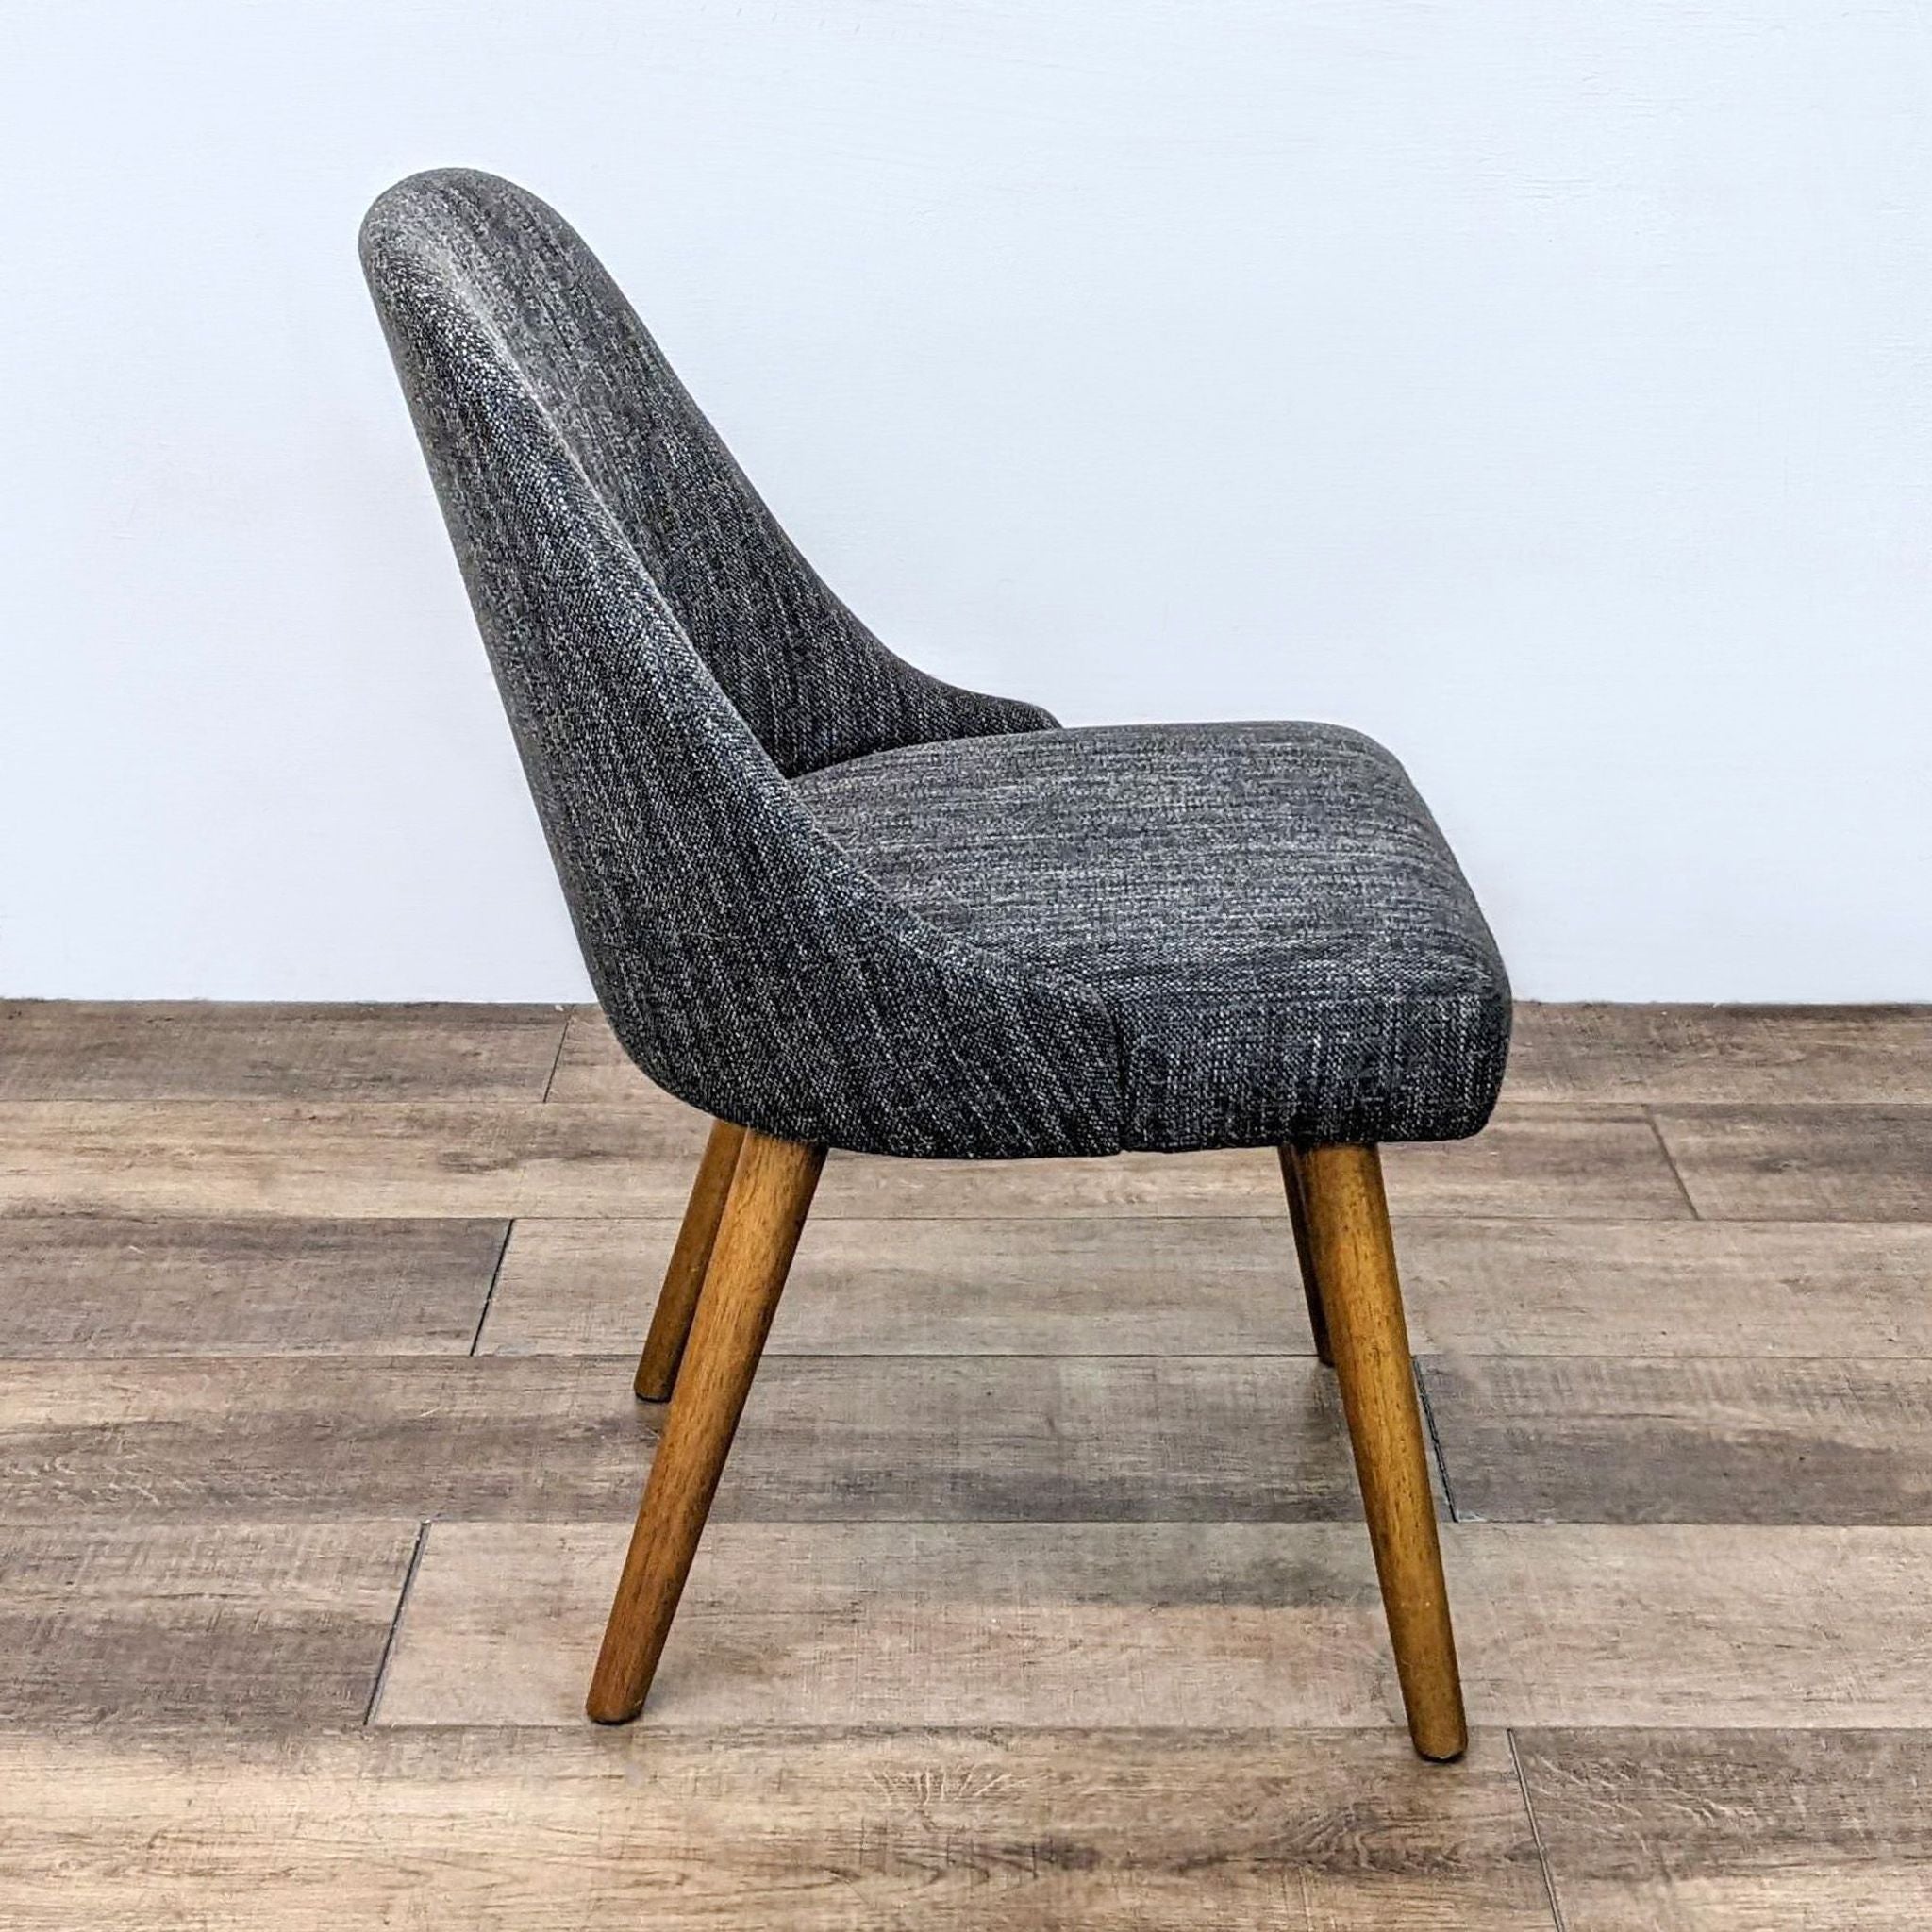 Side view of West Elm Mid-Century Dining Chair, showcasing the sloping back and retro-inspired wide seat against a wooden floor.